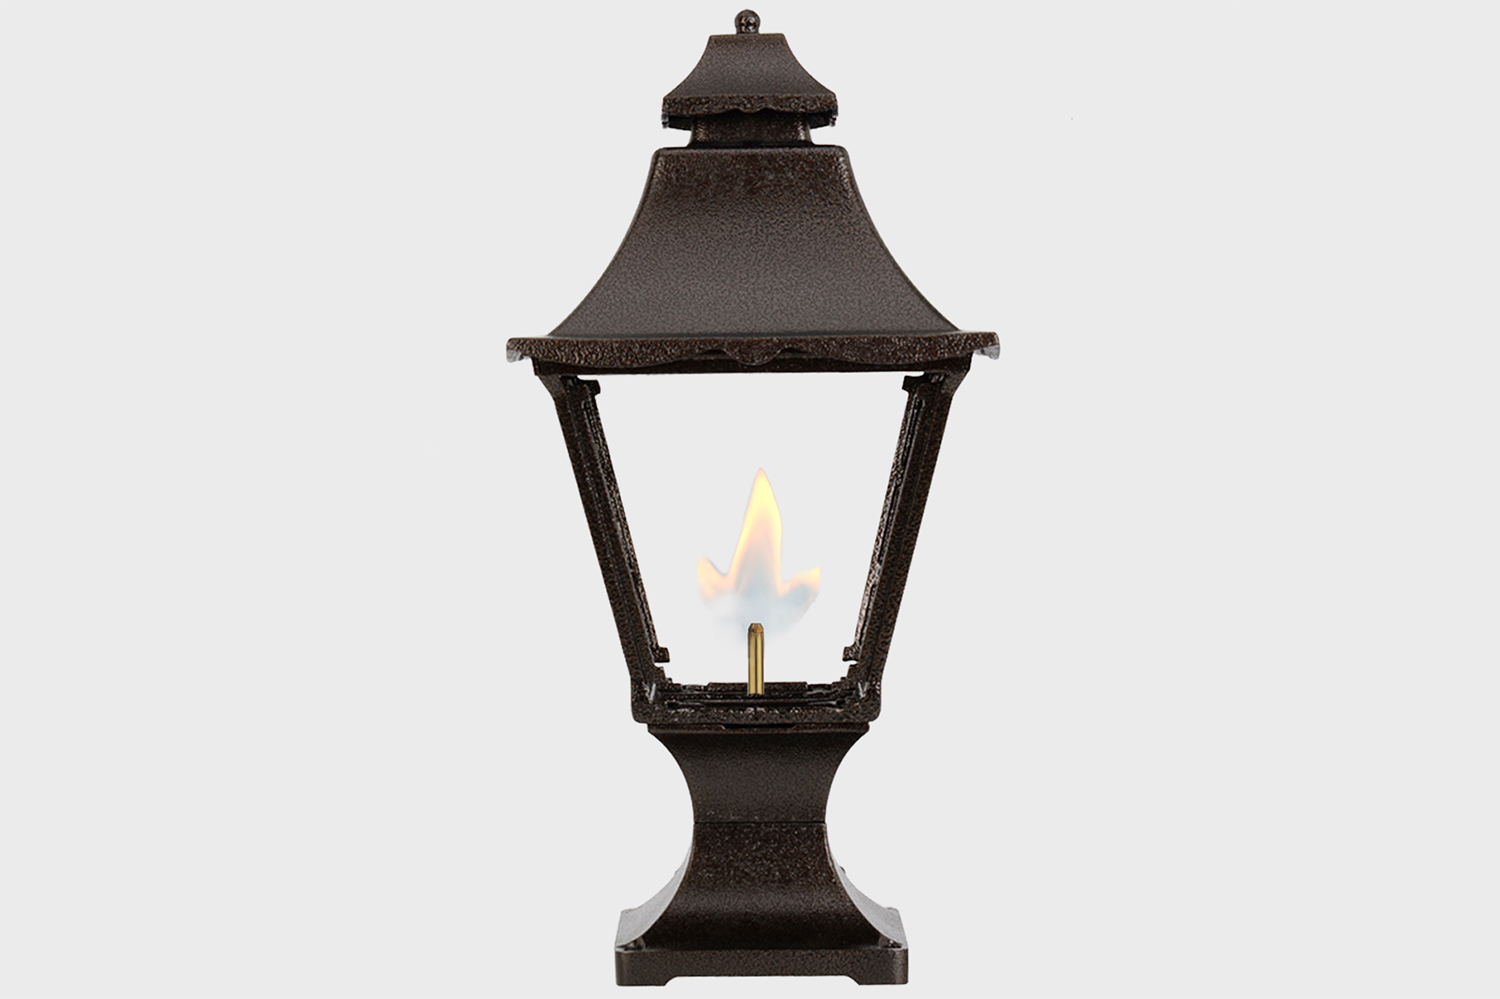 Essex Gas Light open flame from american gas lamps